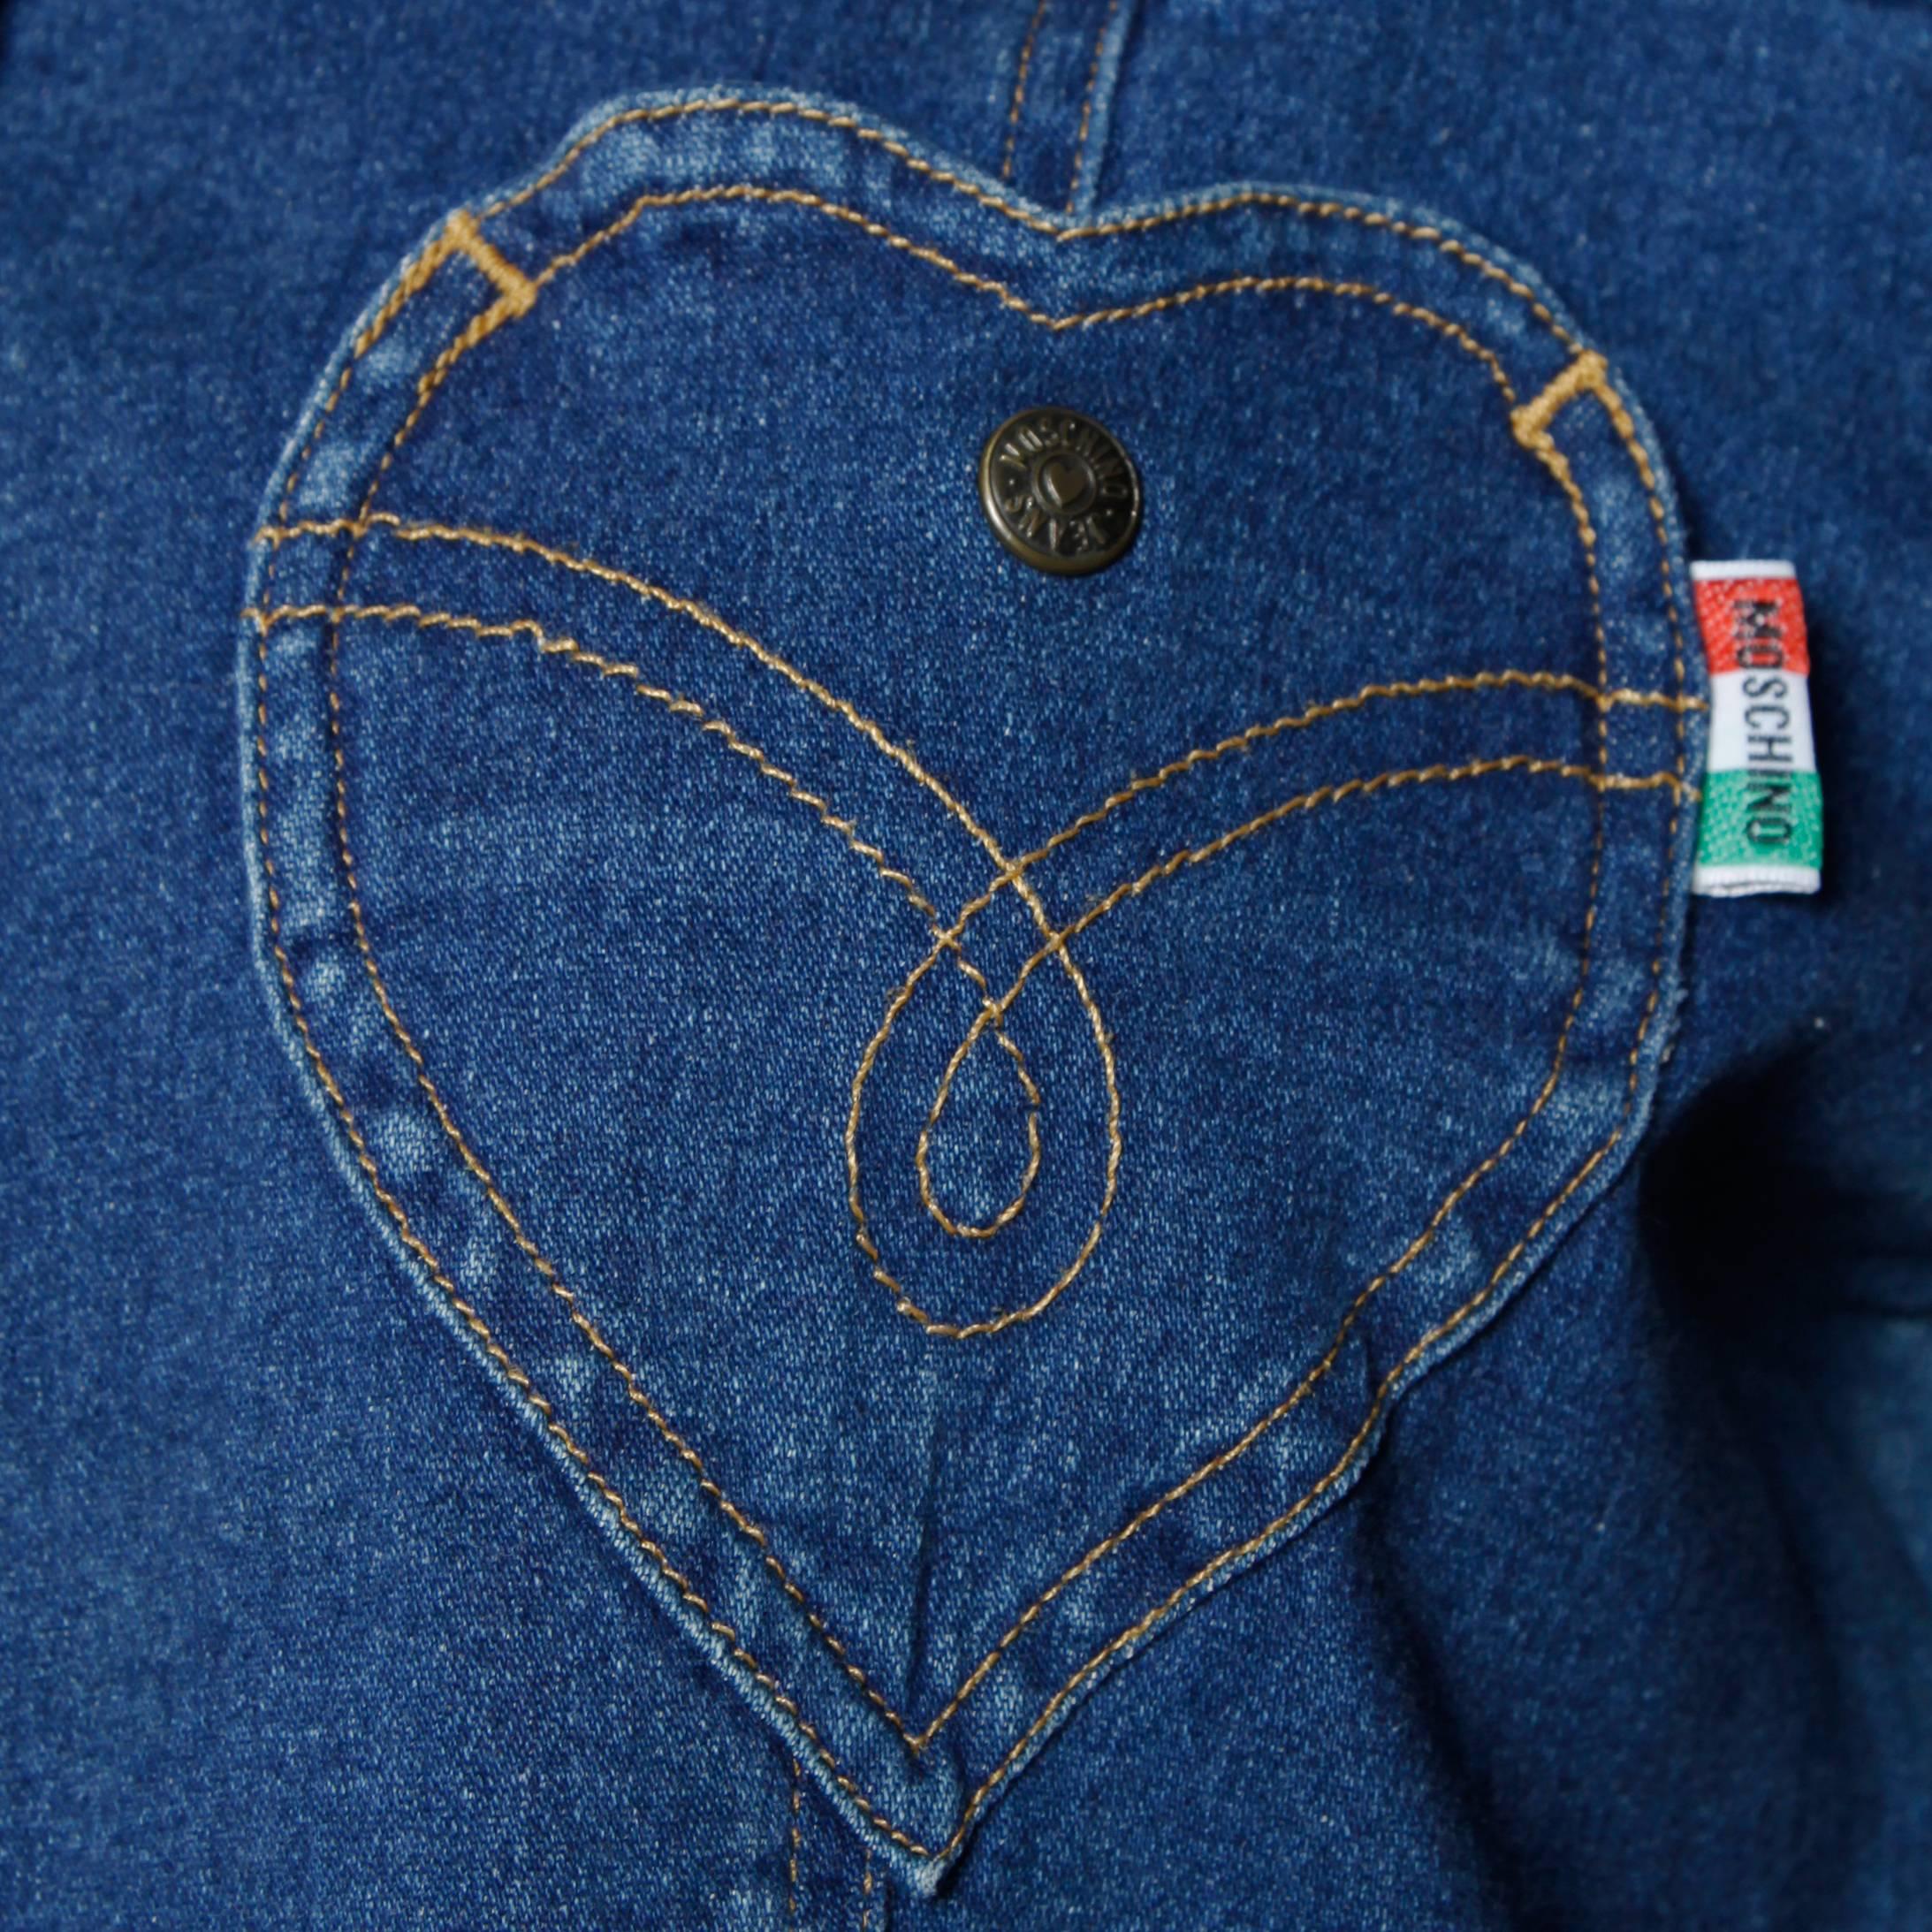 Vintage denim shirt or jacket with a heart pocket and snap up front by Moschino Jeans. Unlined
with front pockets and front snap closure. Fabric: 98% Cotton/ 2% Elastic. The marked size is  I 44/ US 10/ F 40/ GB 14/ D 40 and the top fits like a